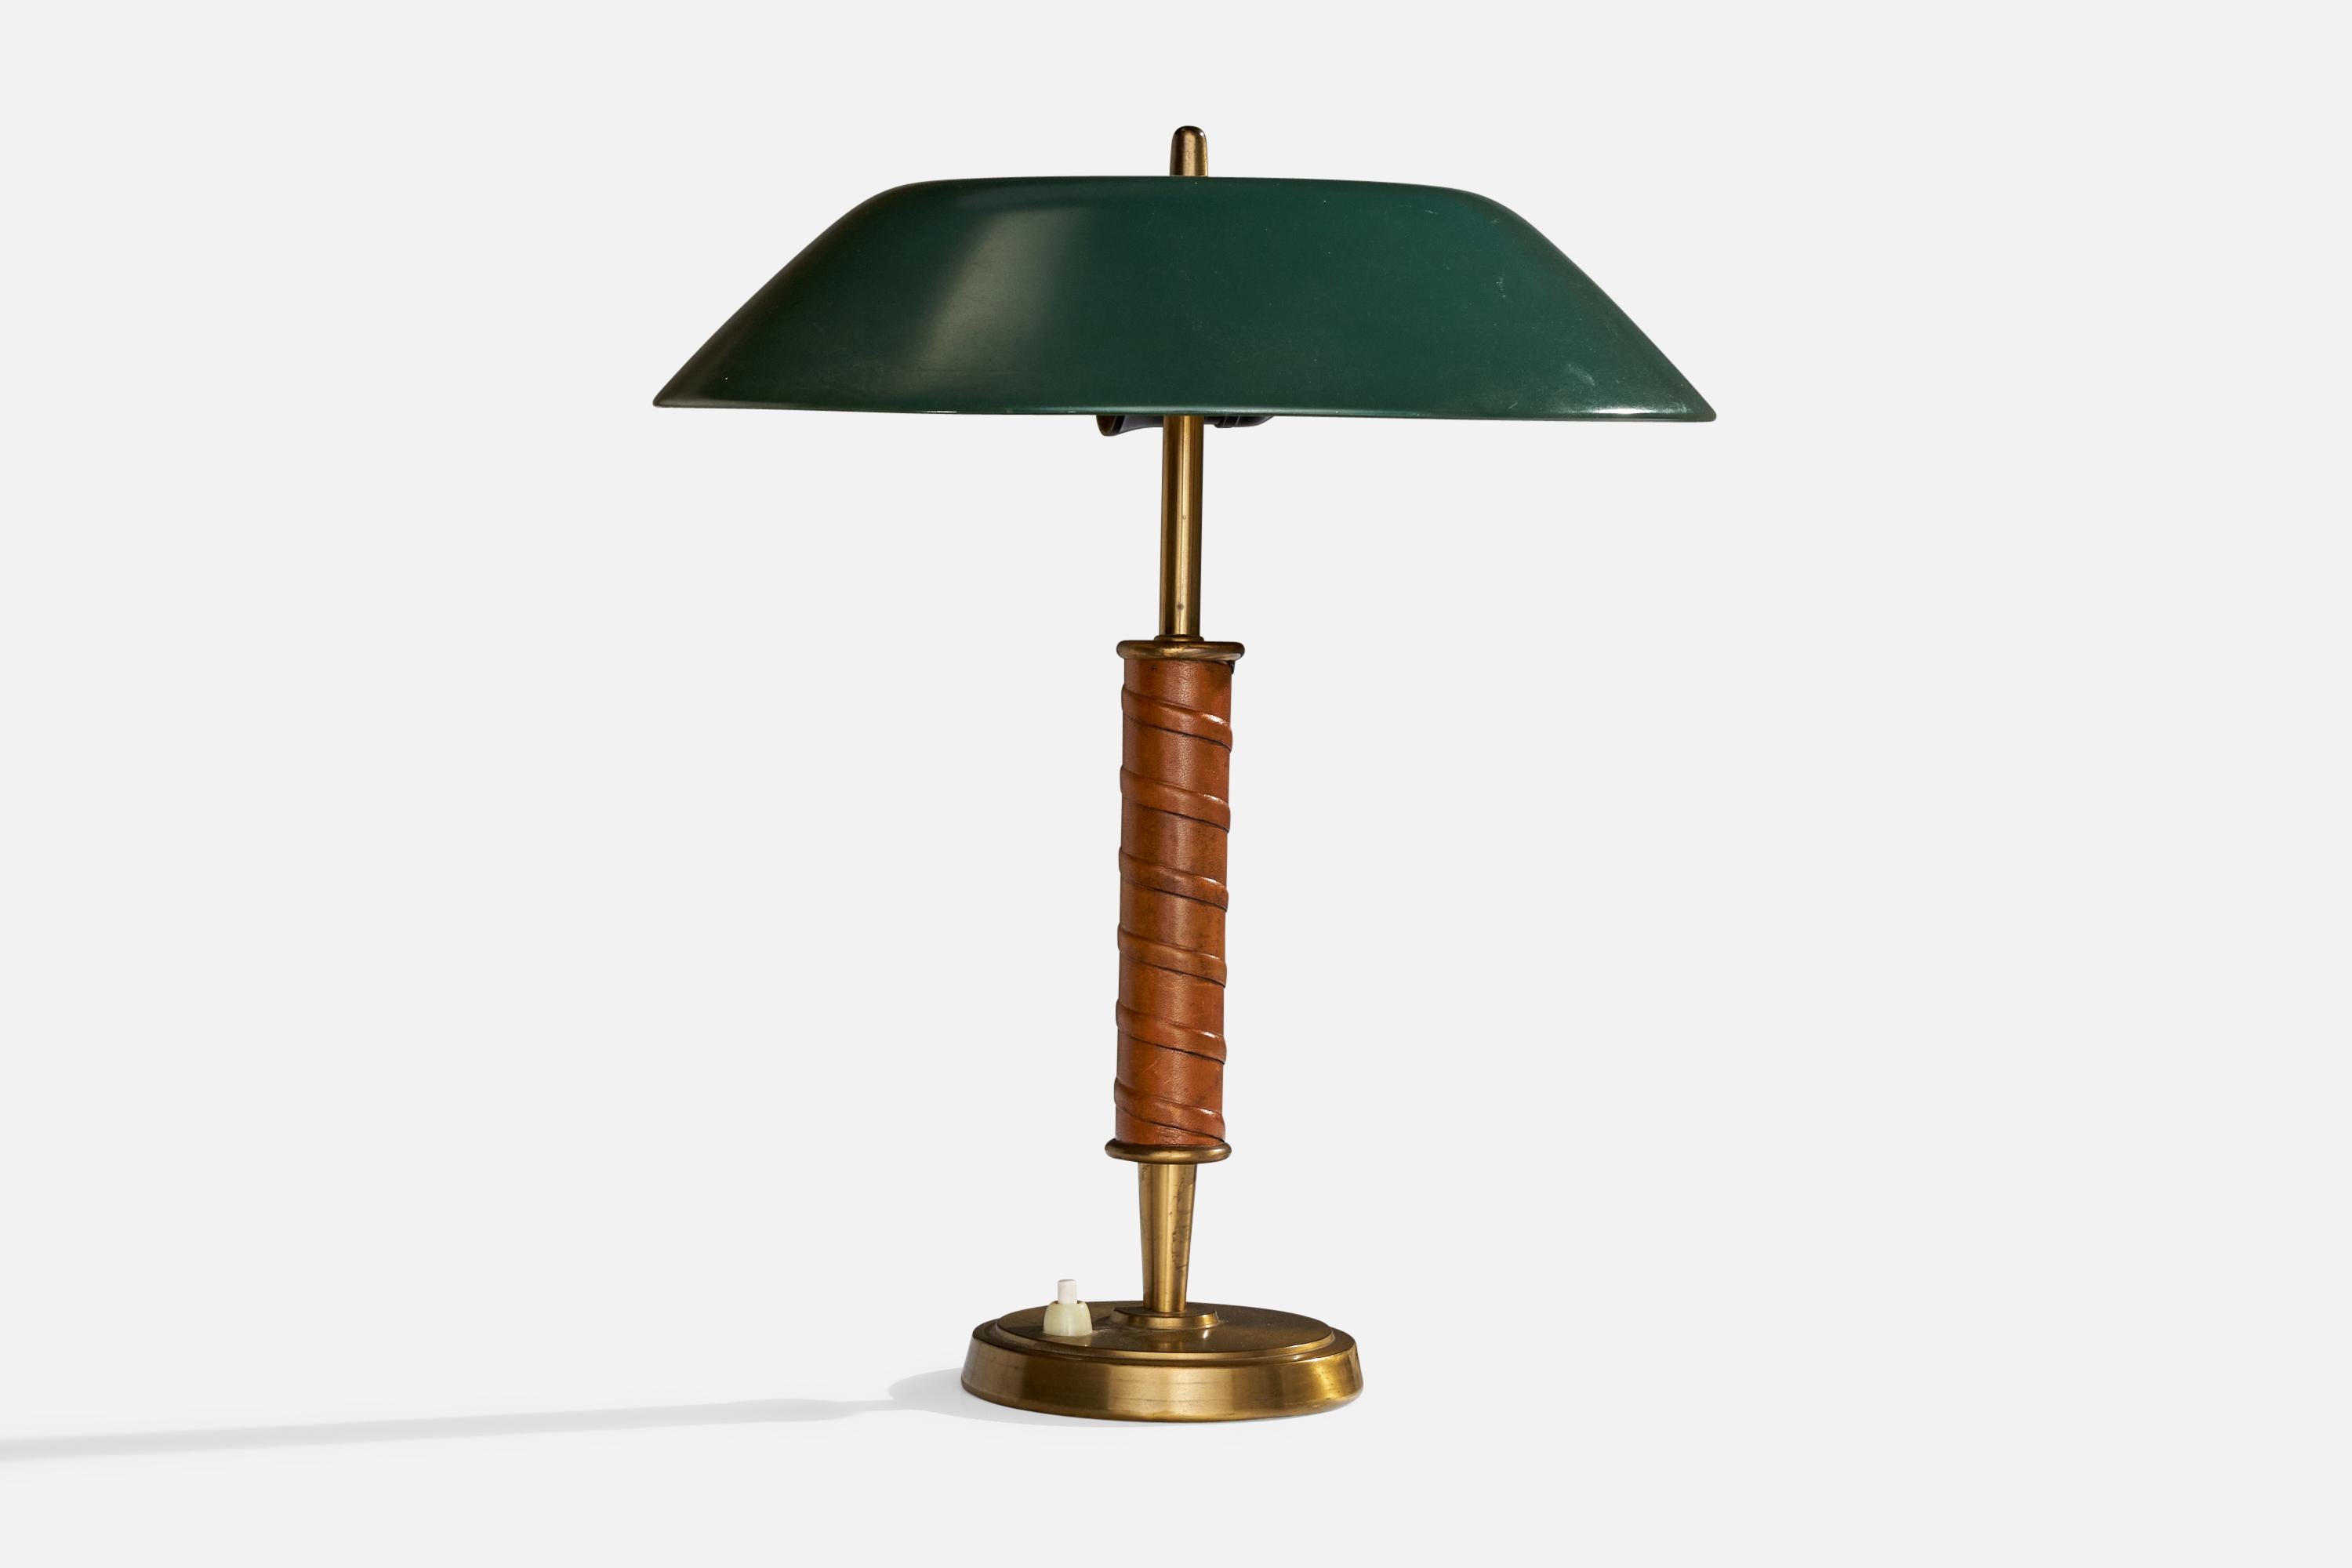 A brass, green-lacquered metal and leather table lamp produced by Nordiska Kompaniet, Sweden, c. 1940s.

Overall Dimensions (inches): 15.36”  H x 12.6” W x 12.6”  D
Stated dimensions include shade.
Bulb Specifications: E-26 Bulb
Number of Sockets: